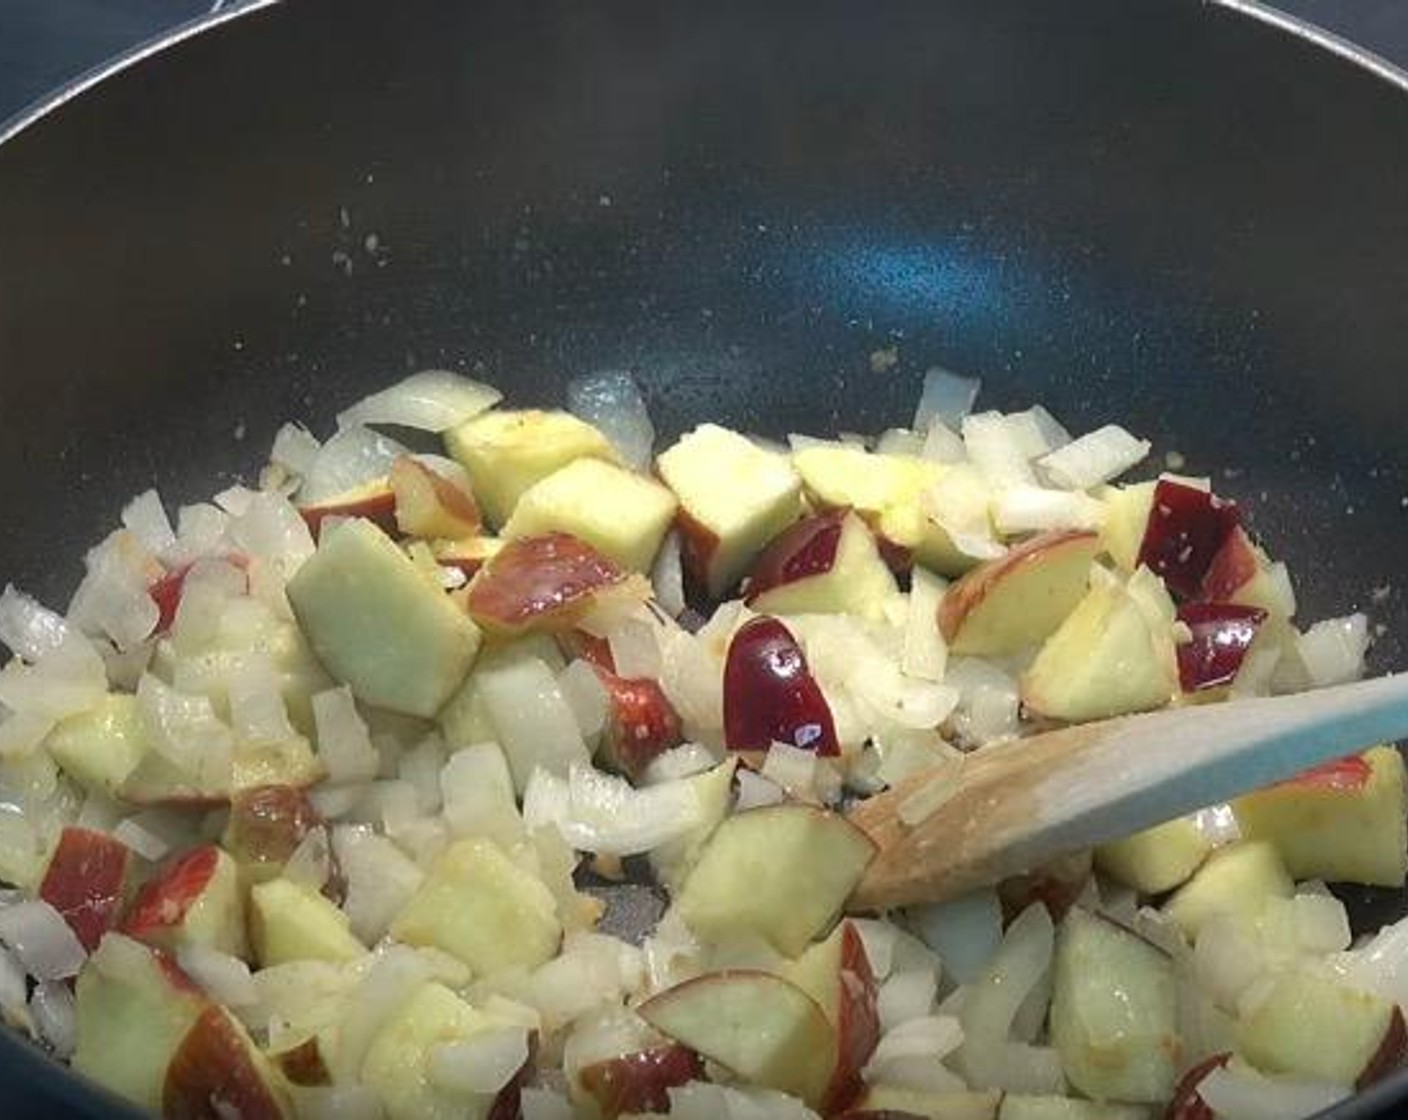 step 1 In a frying pan over medium heat, add Vegetable Oil (as needed), Yellow Onion (1), Red Apple (1), and Fresh Ginger (1/2 Tbsp). Cook for 7-8 minutes, or until the onions and apples have softened.